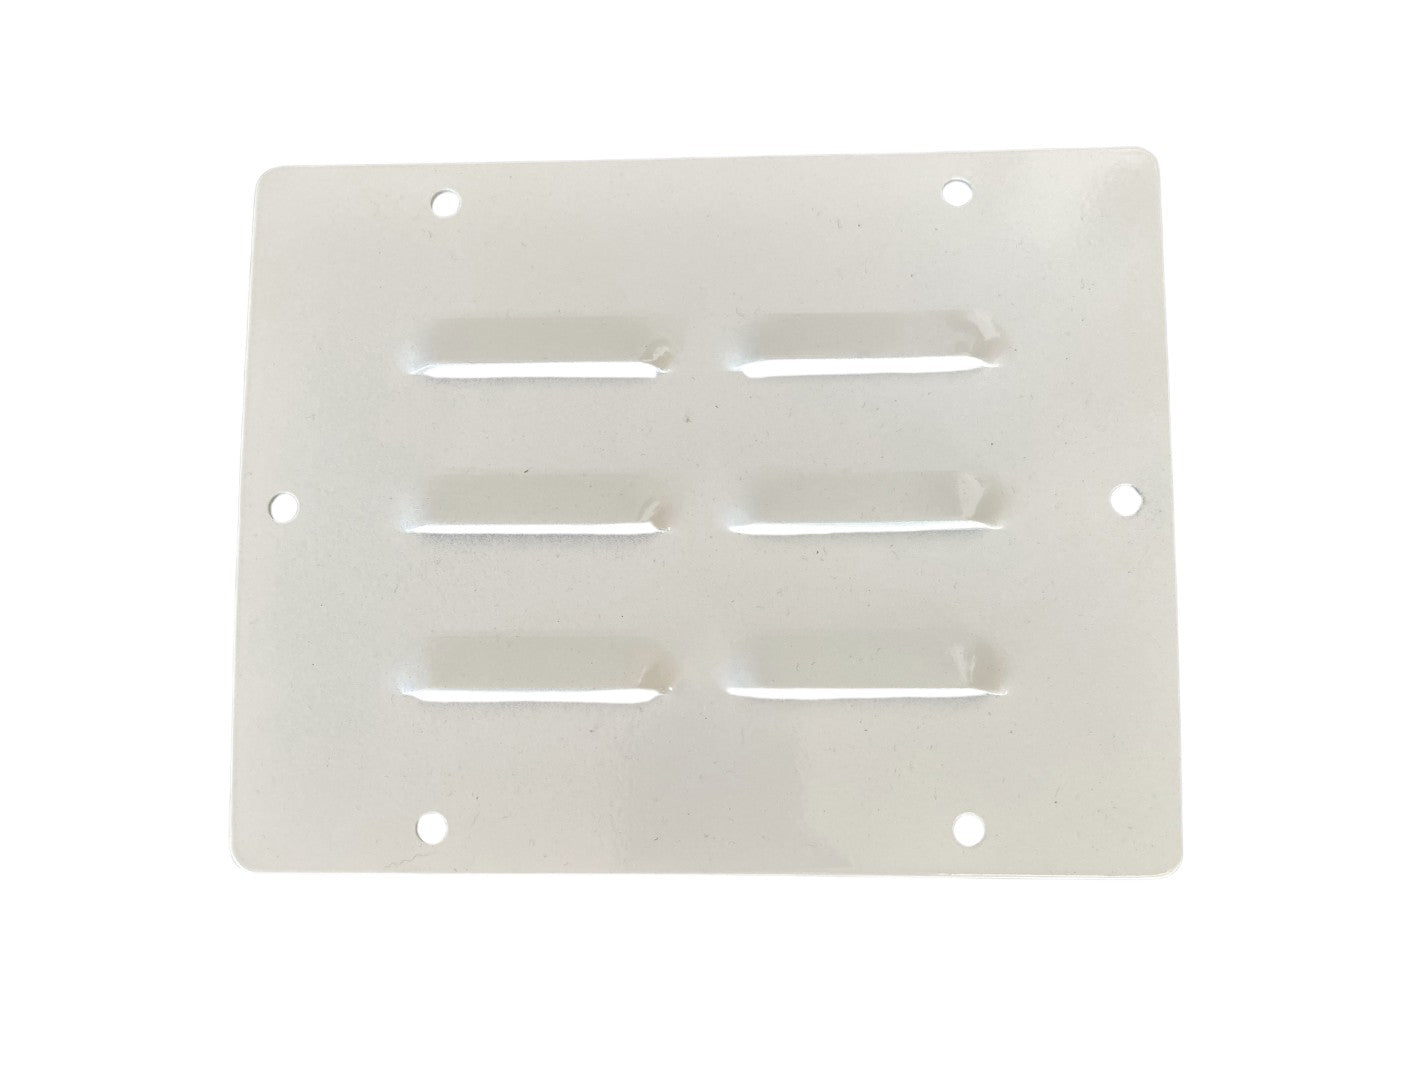 ** CLEARANCE ** V1 Front Mount Louvered Vent Plate - White